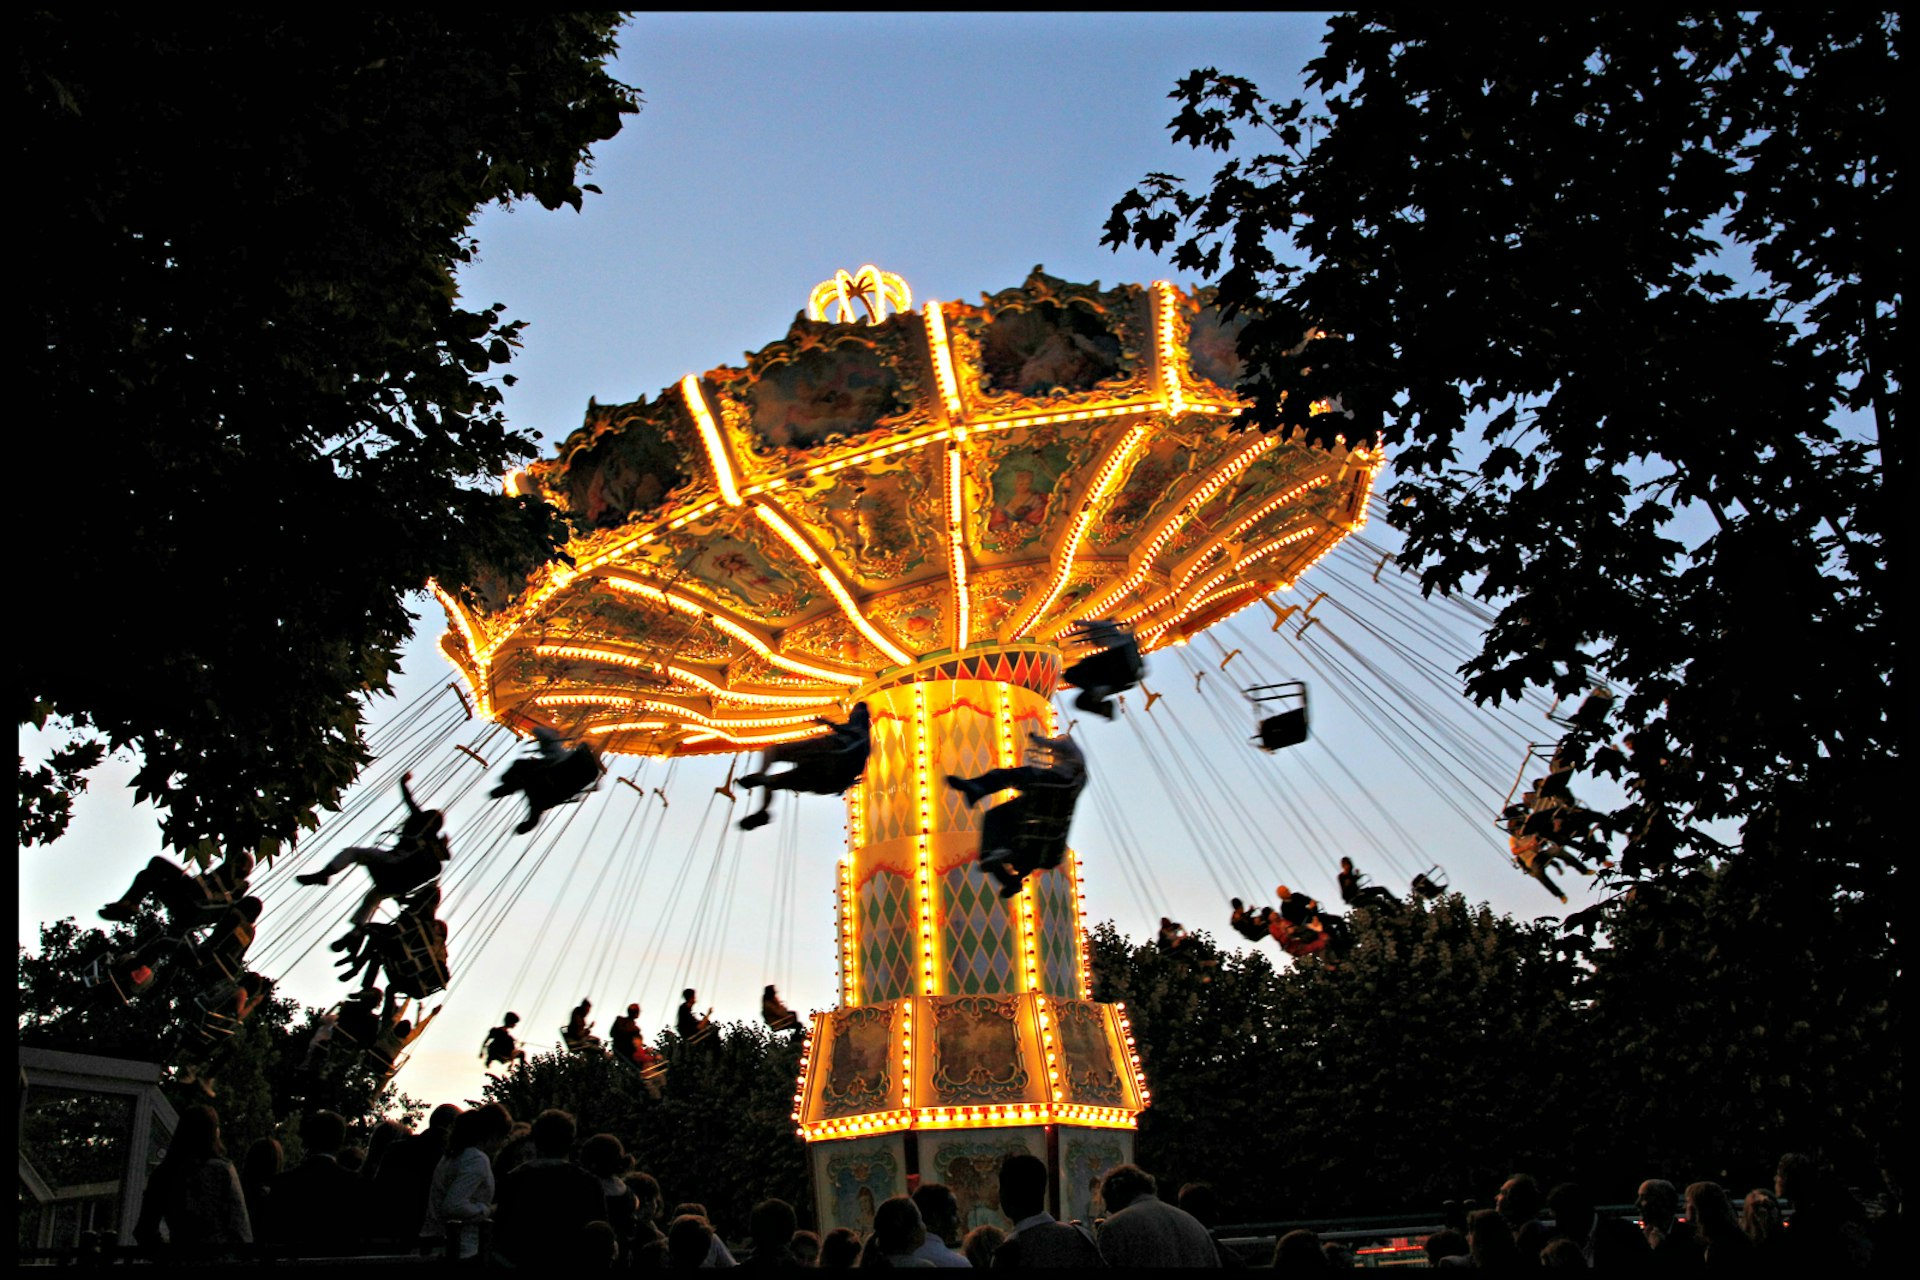 Swing ride carousel all lit up at dusk, with riders silhouetted at Jardin D'Acclimatation in Paris